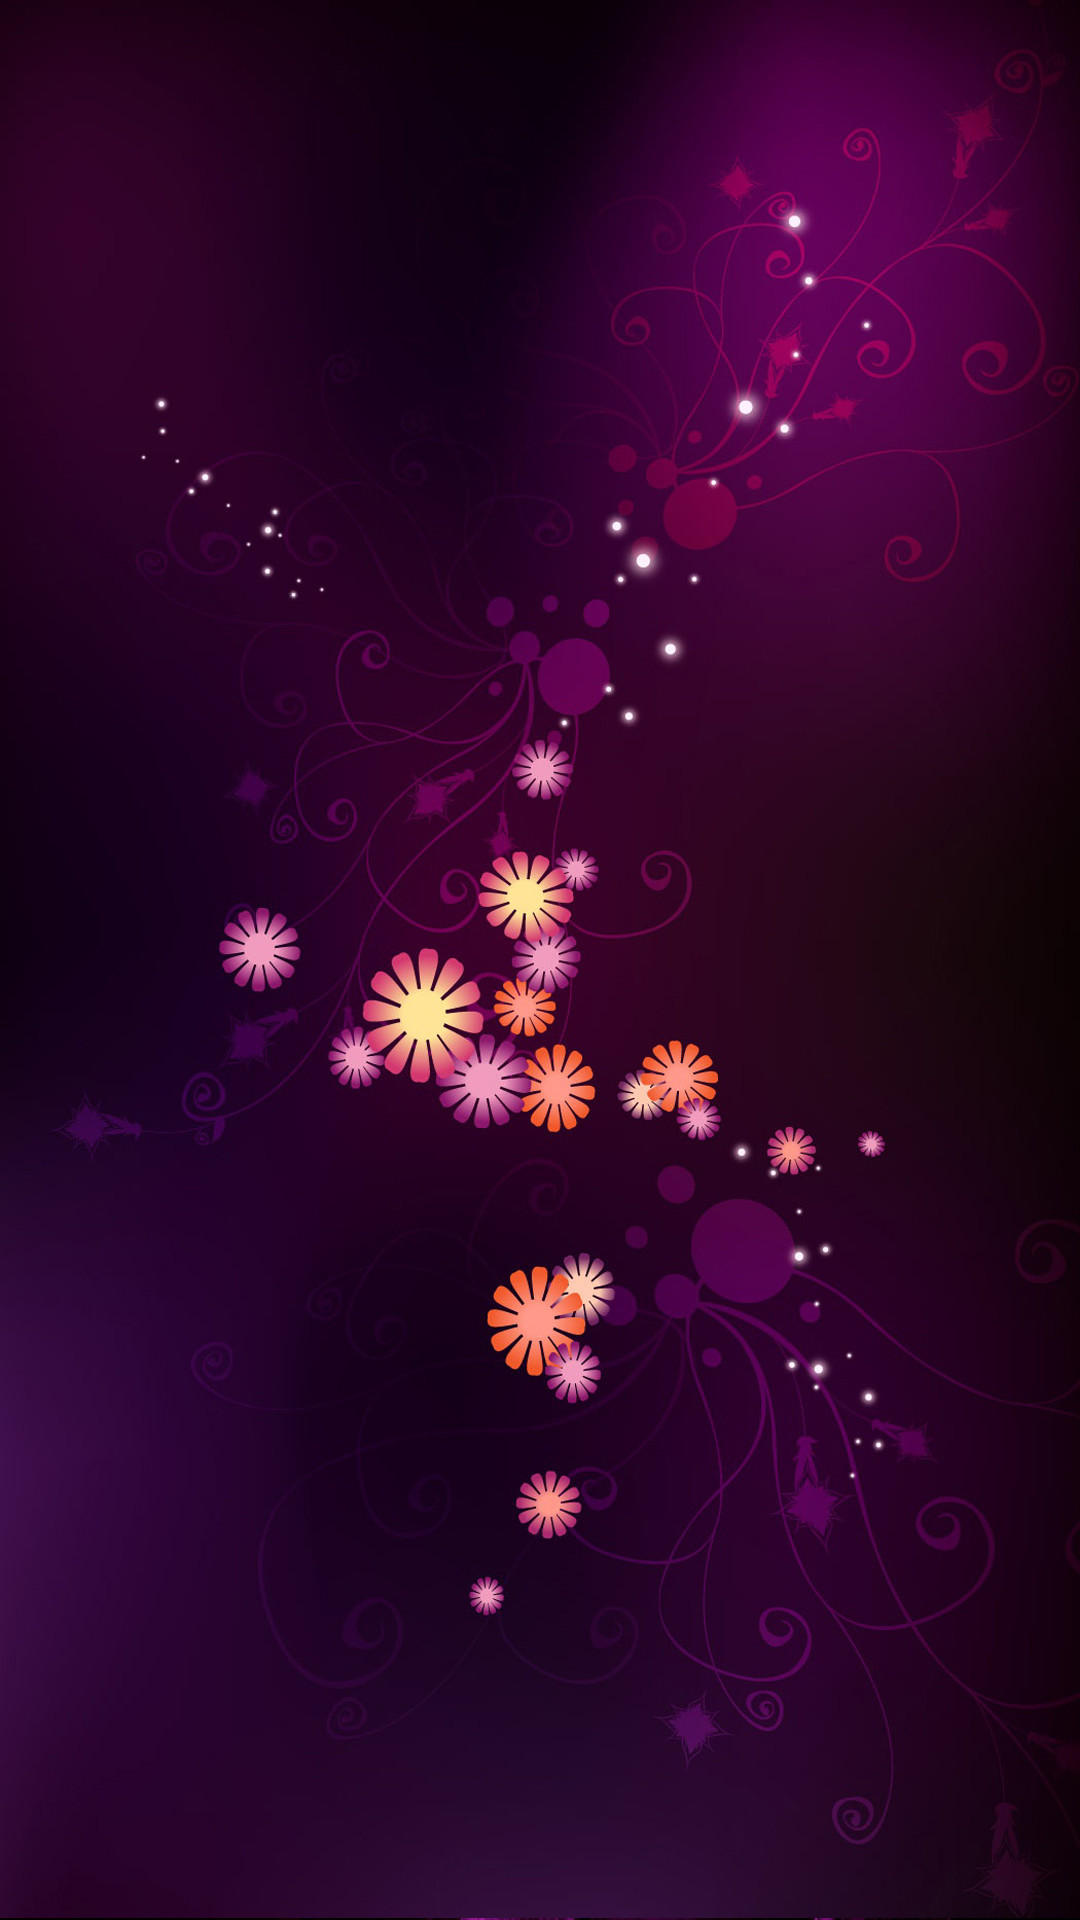 1080x1920 Cute Daisy Flower Abstract Mobile HD Wallpaper -  http://helpyourselfimages.com/